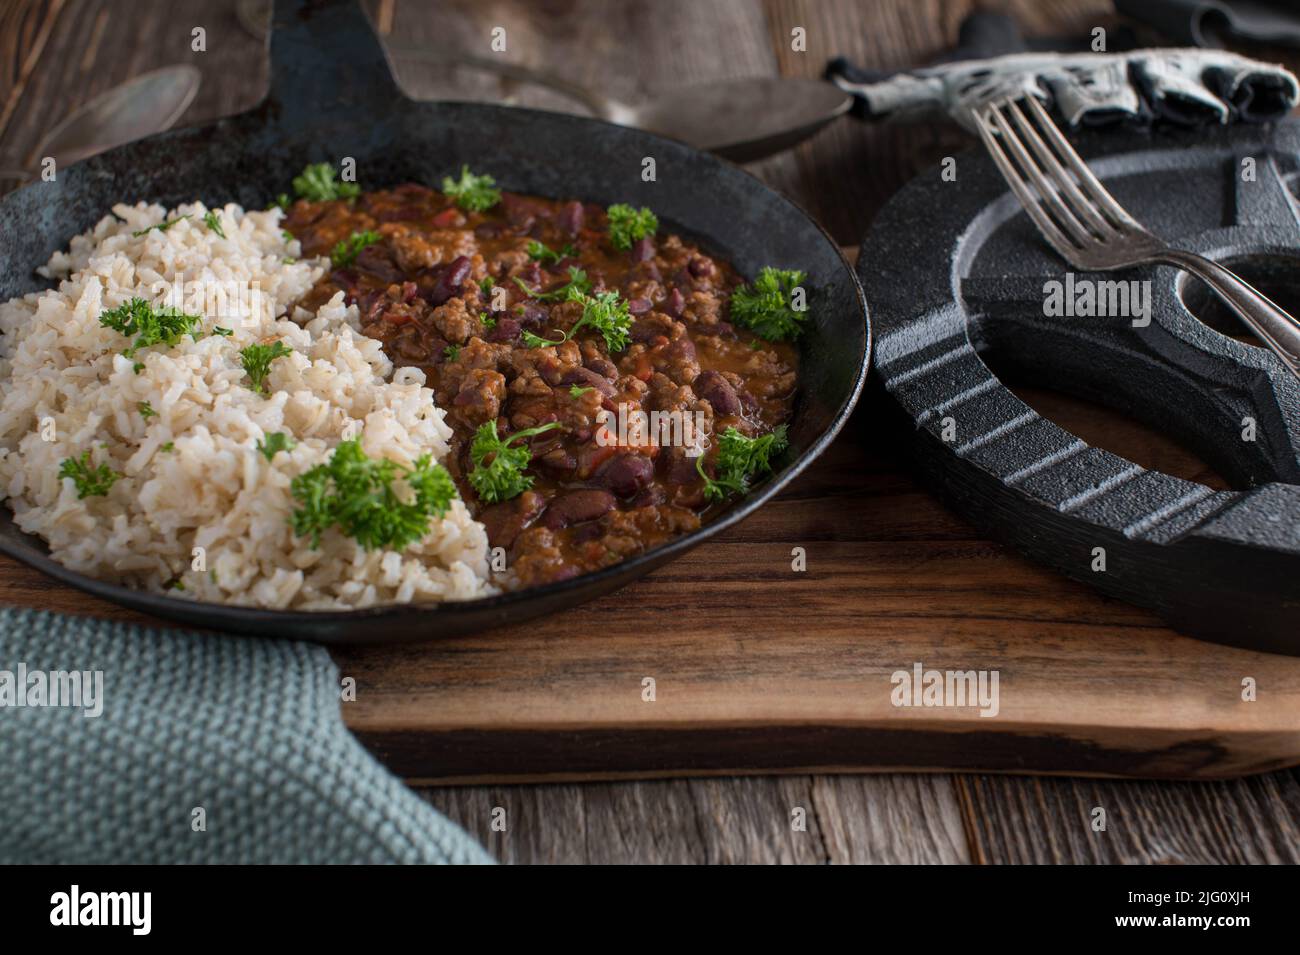 Bodybuilding meal with low fat ground beef, kidney beans, vegetables and tomato sauce. Served with brown rice. Stock Photo